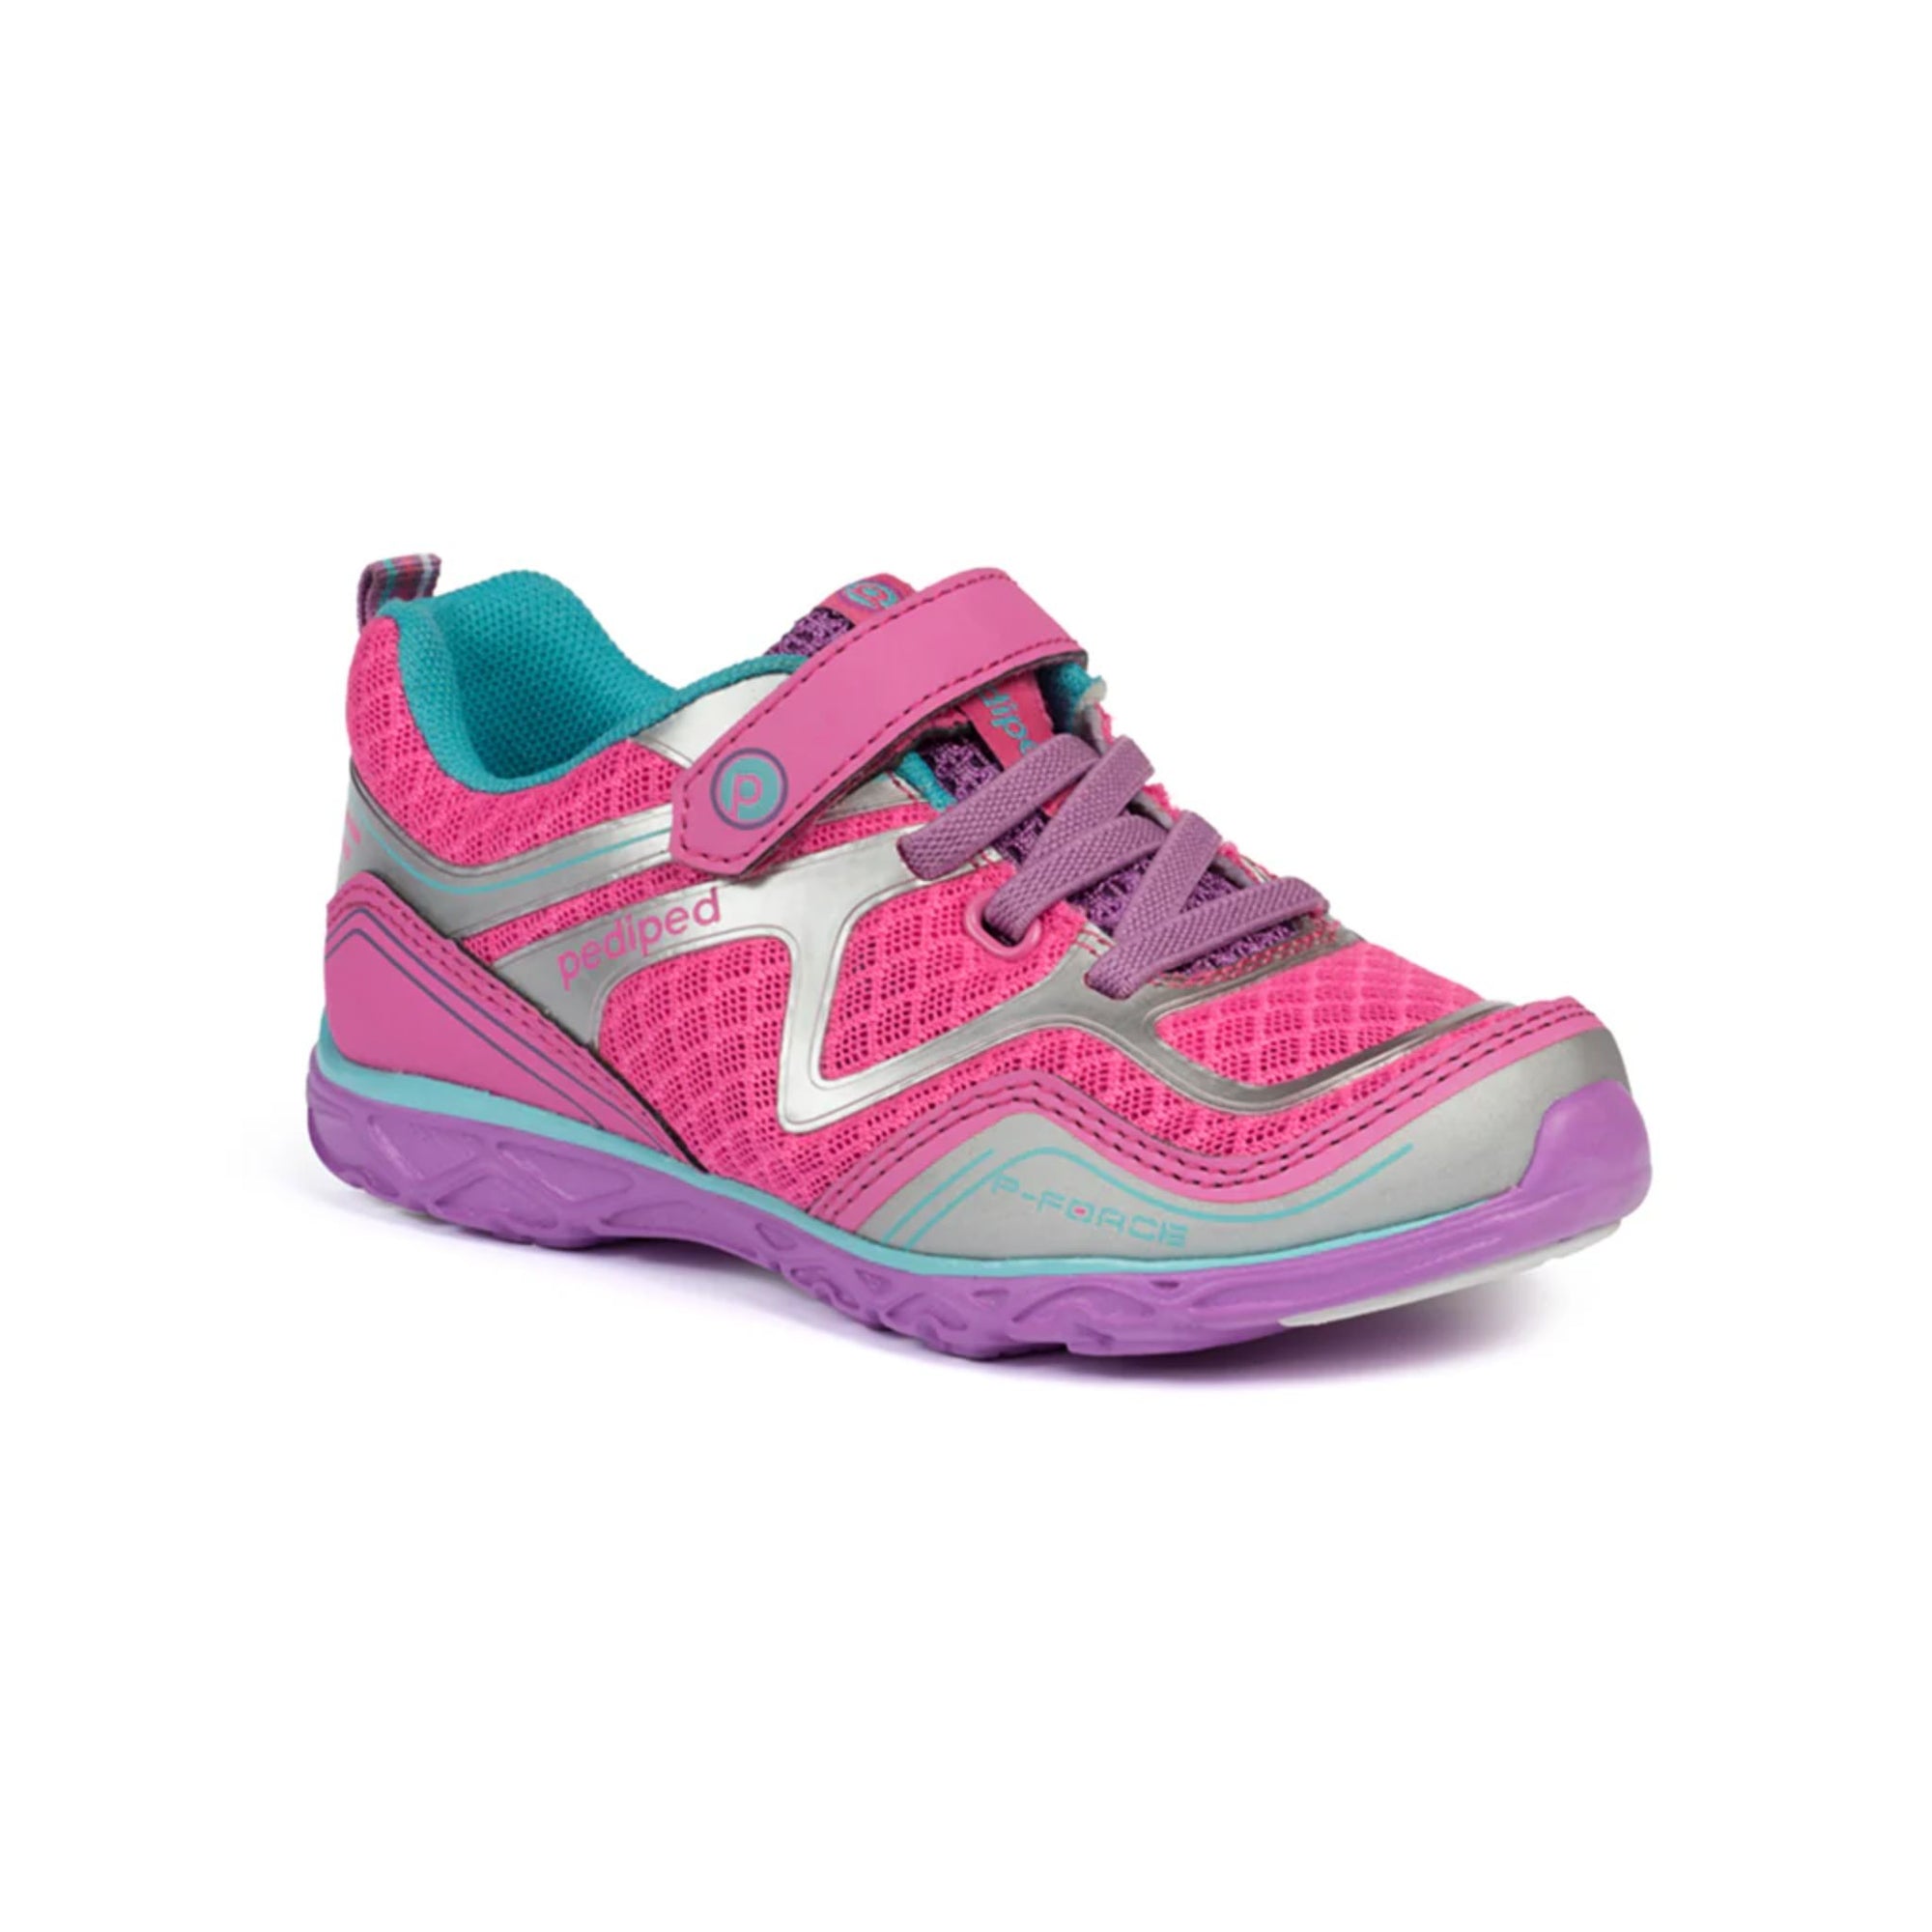 Pediped Flex Force Pink / Silver Athletic Shoes